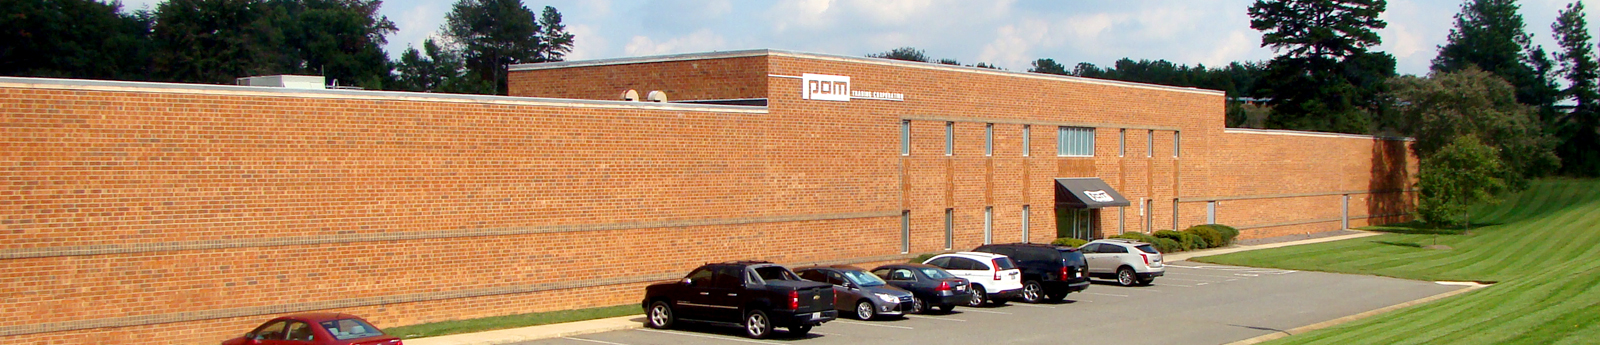 PAM Injection Molding division located central North Carolina